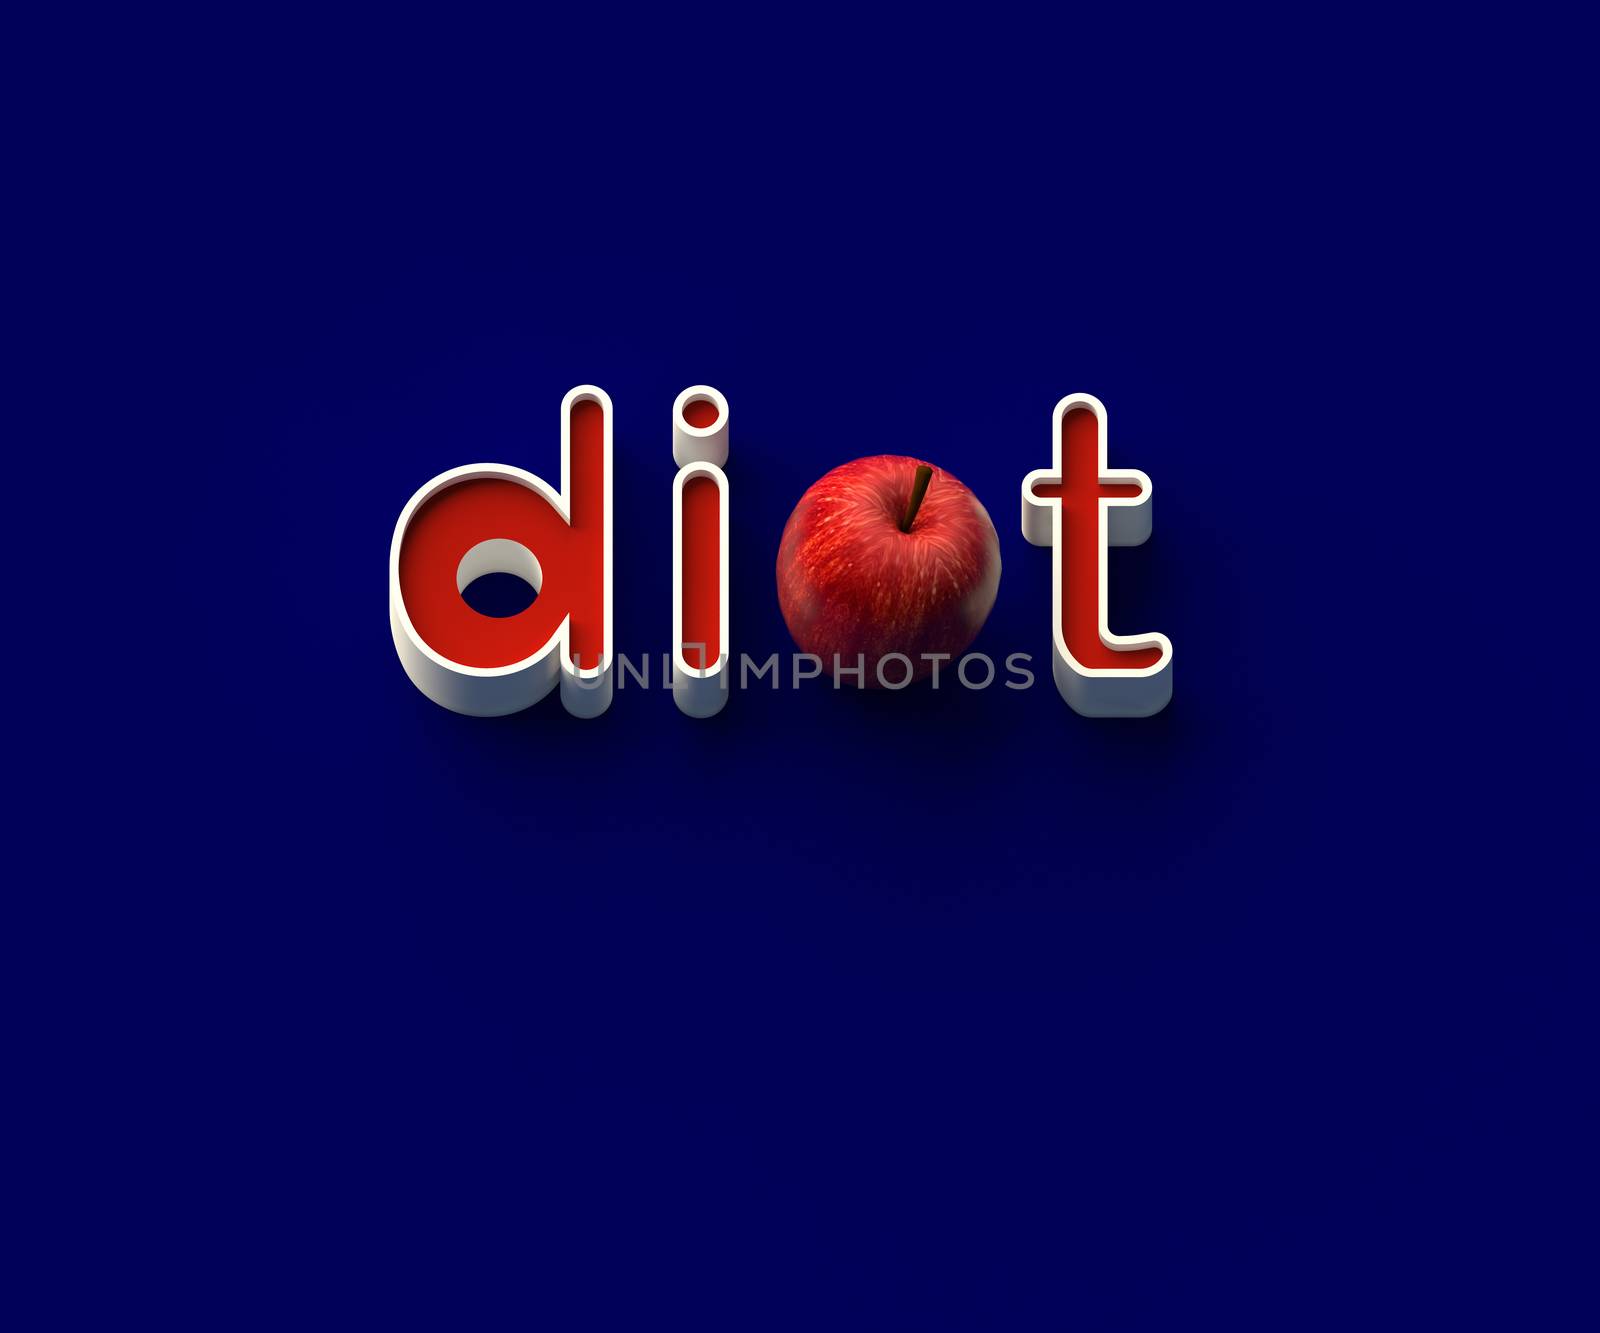 3D RENDERING OF WORDS 'di', AN APPLE AND 't' ON BLUE PLAIN BACKGROUND